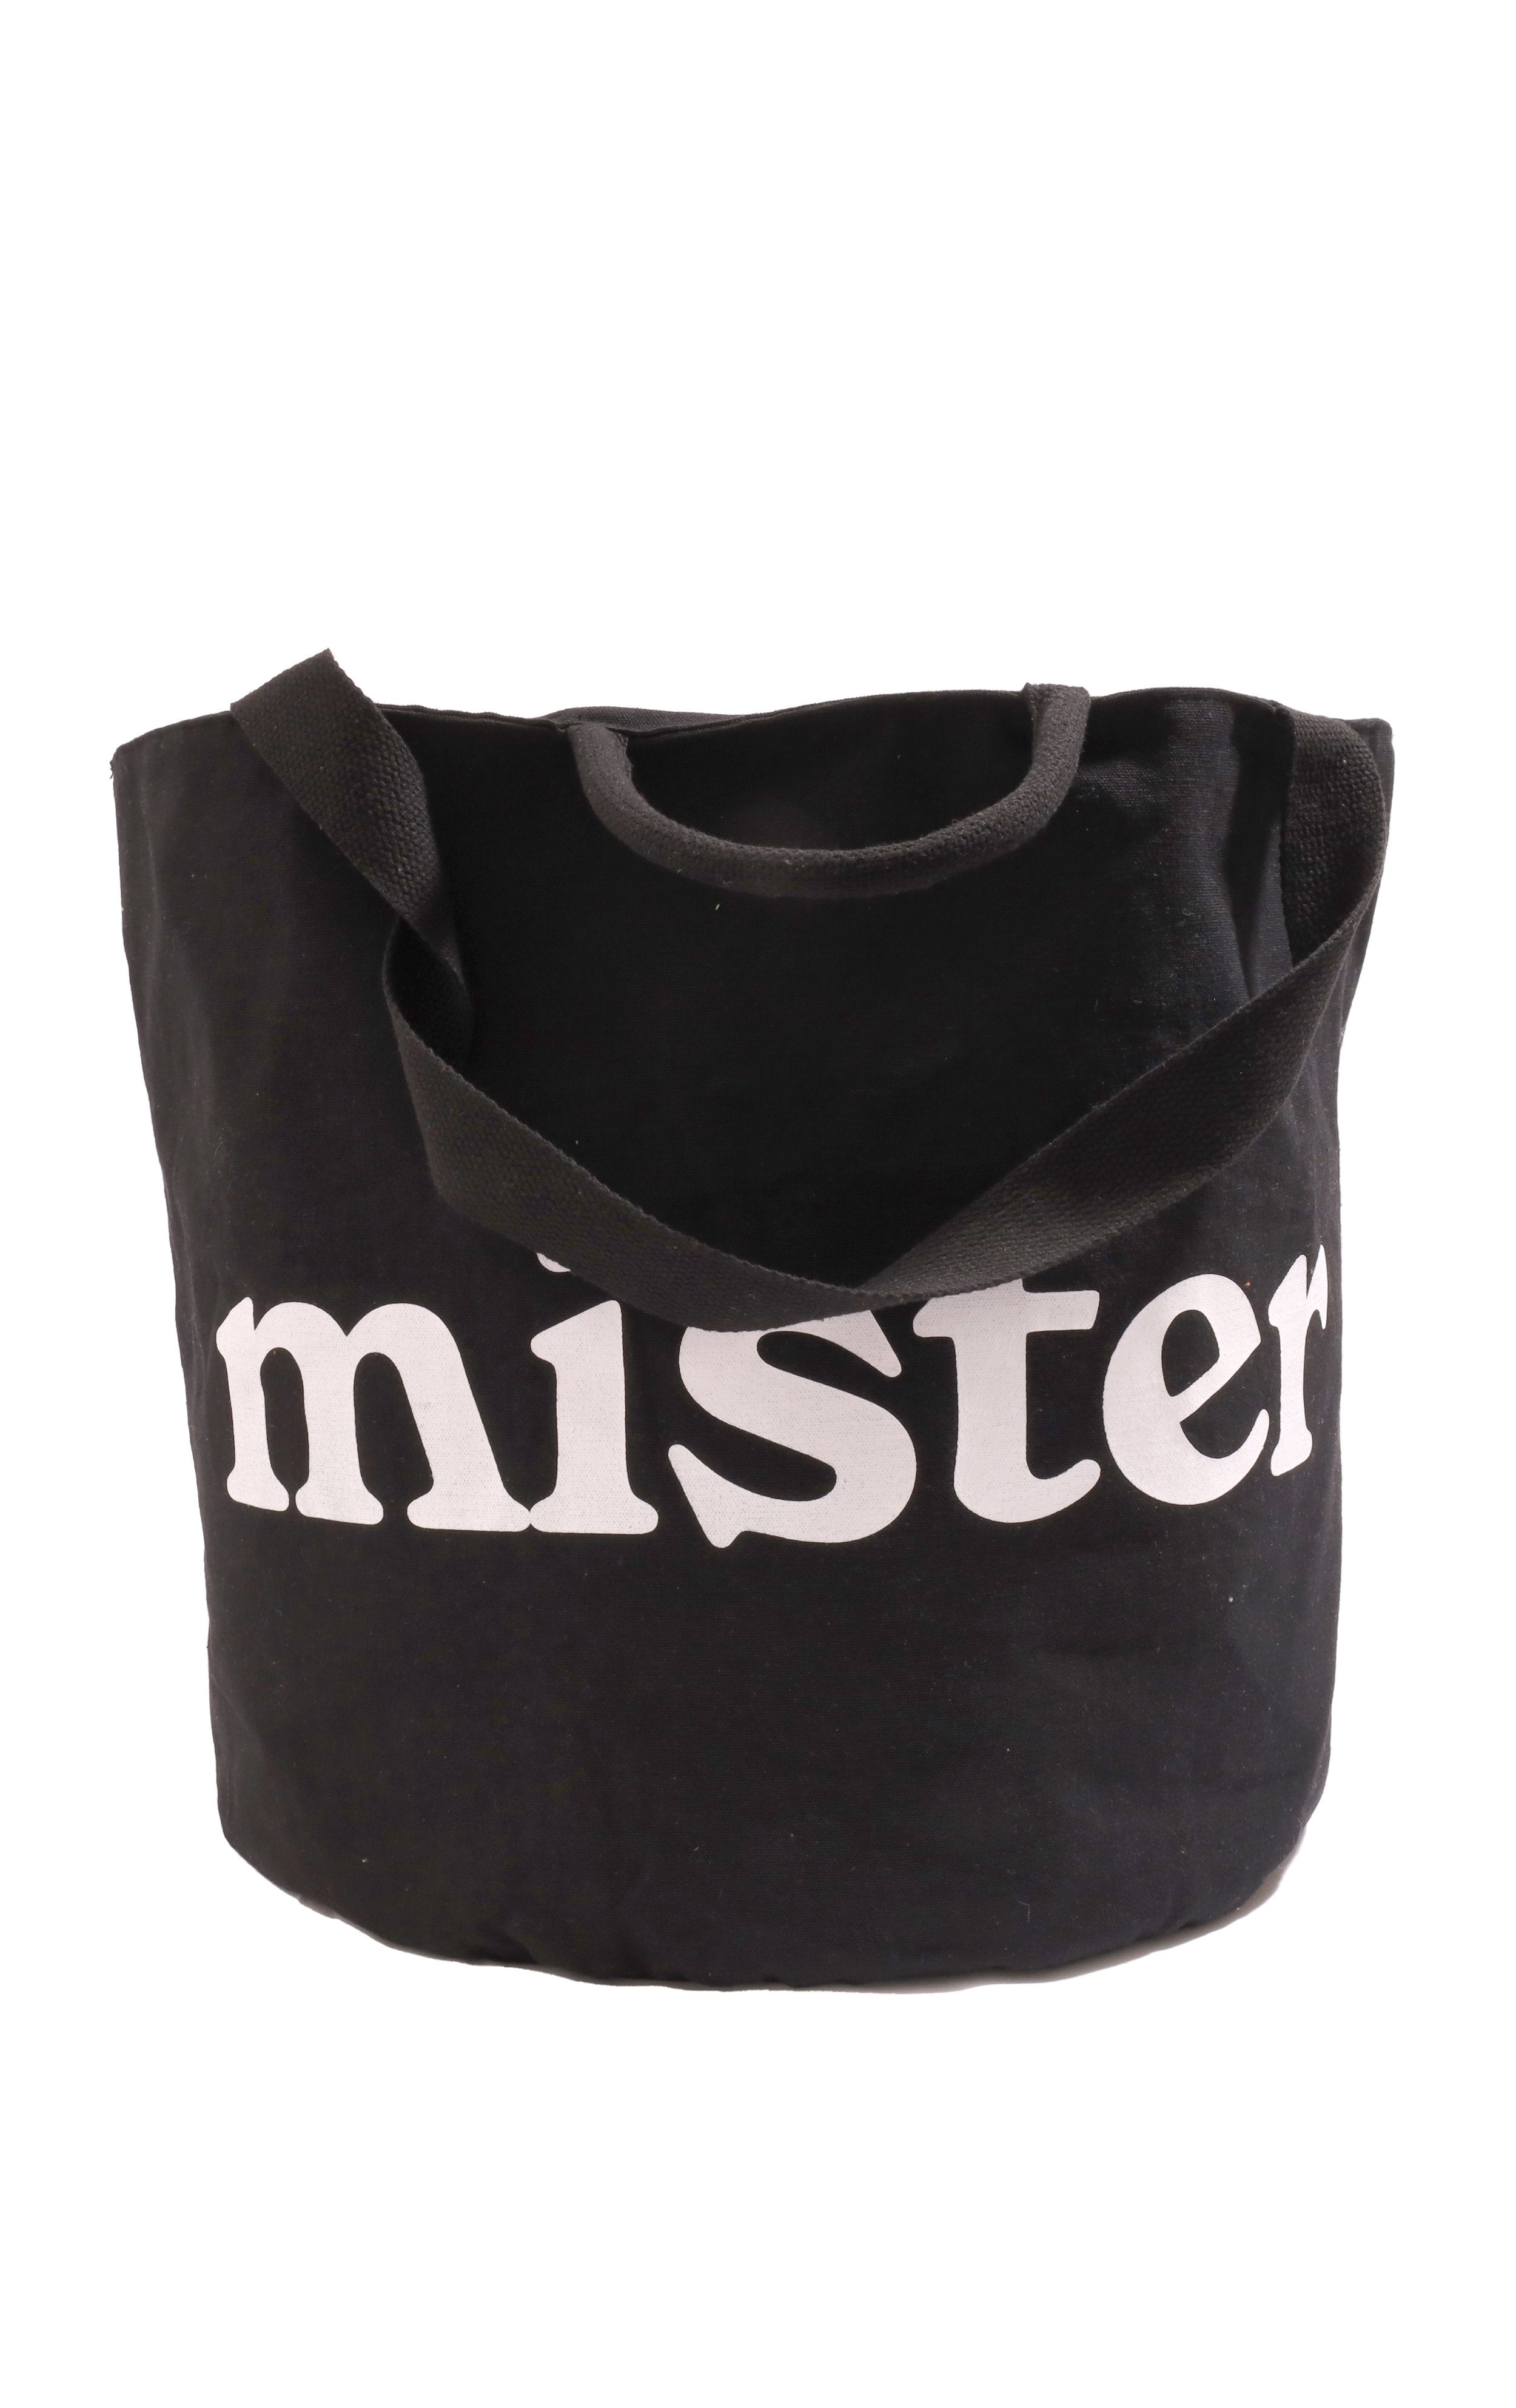 Large Round Tote / Grow Bag - Black-Mister Green-Mister Green